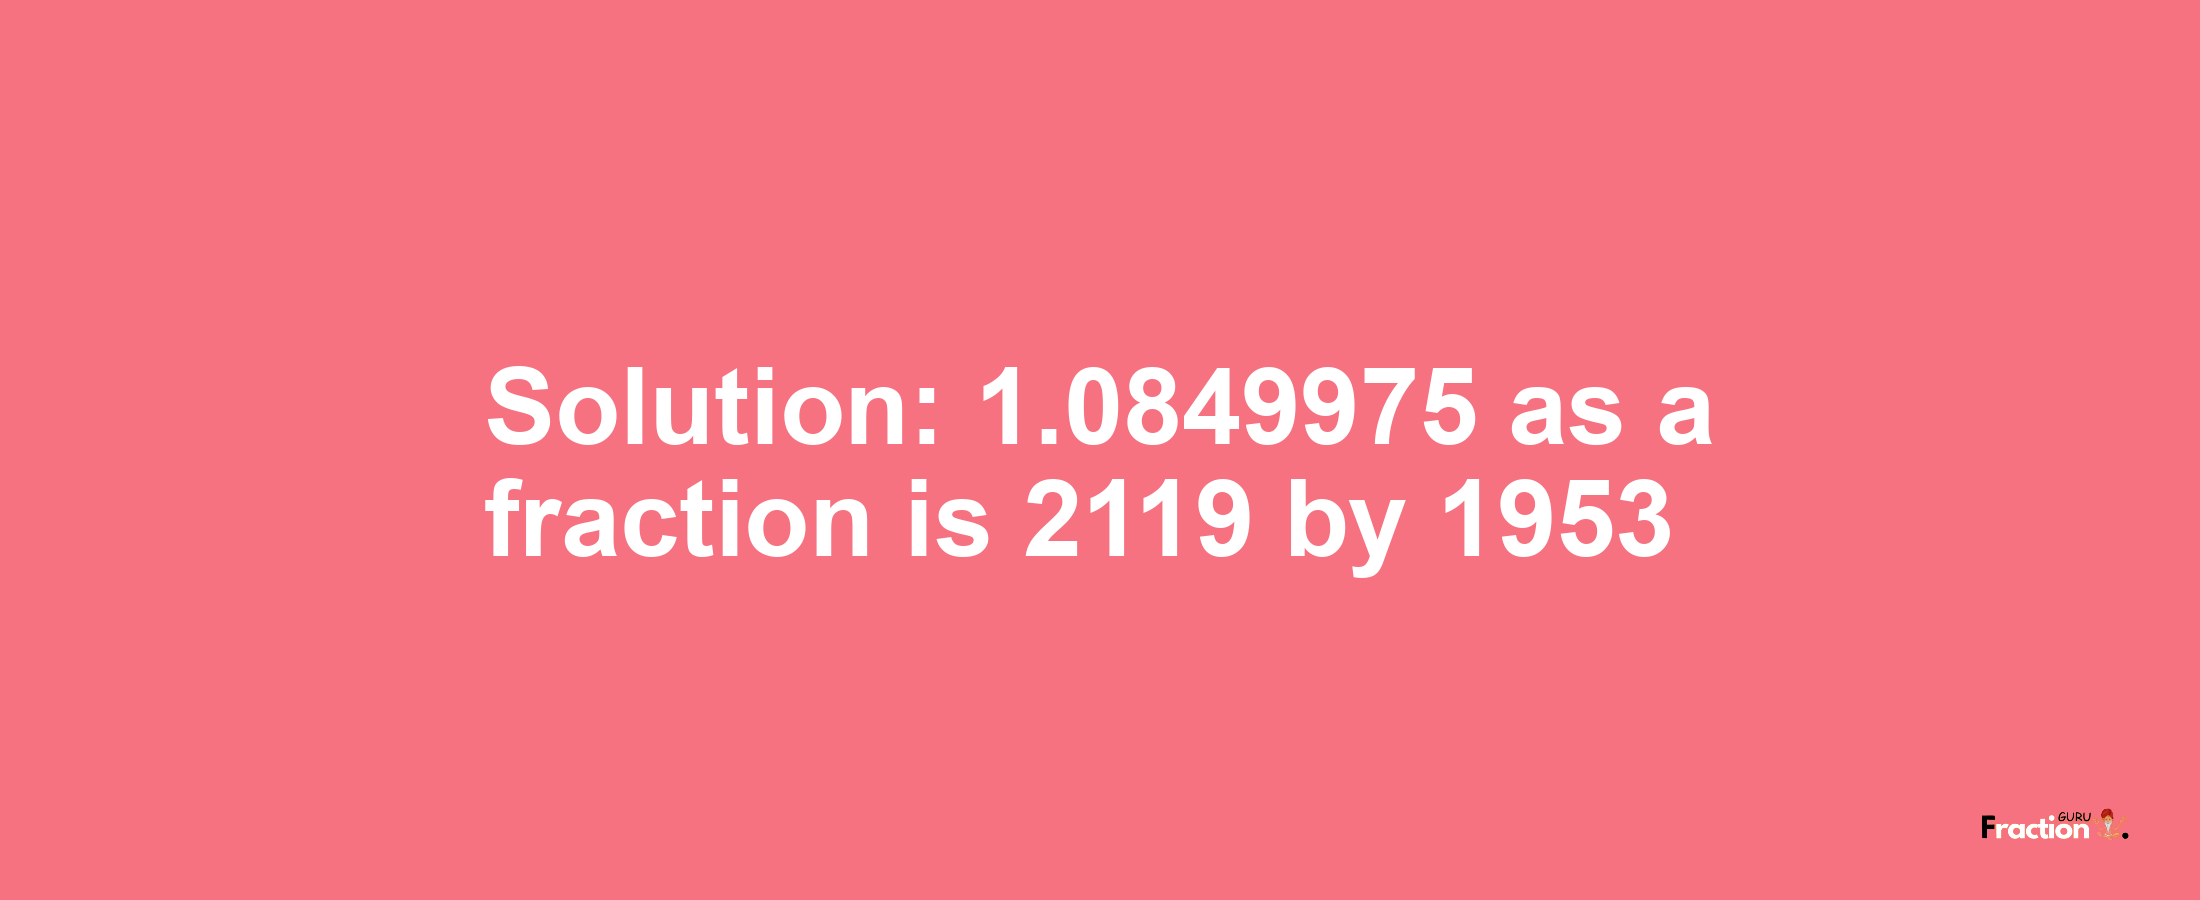 Solution:1.0849975 as a fraction is 2119/1953